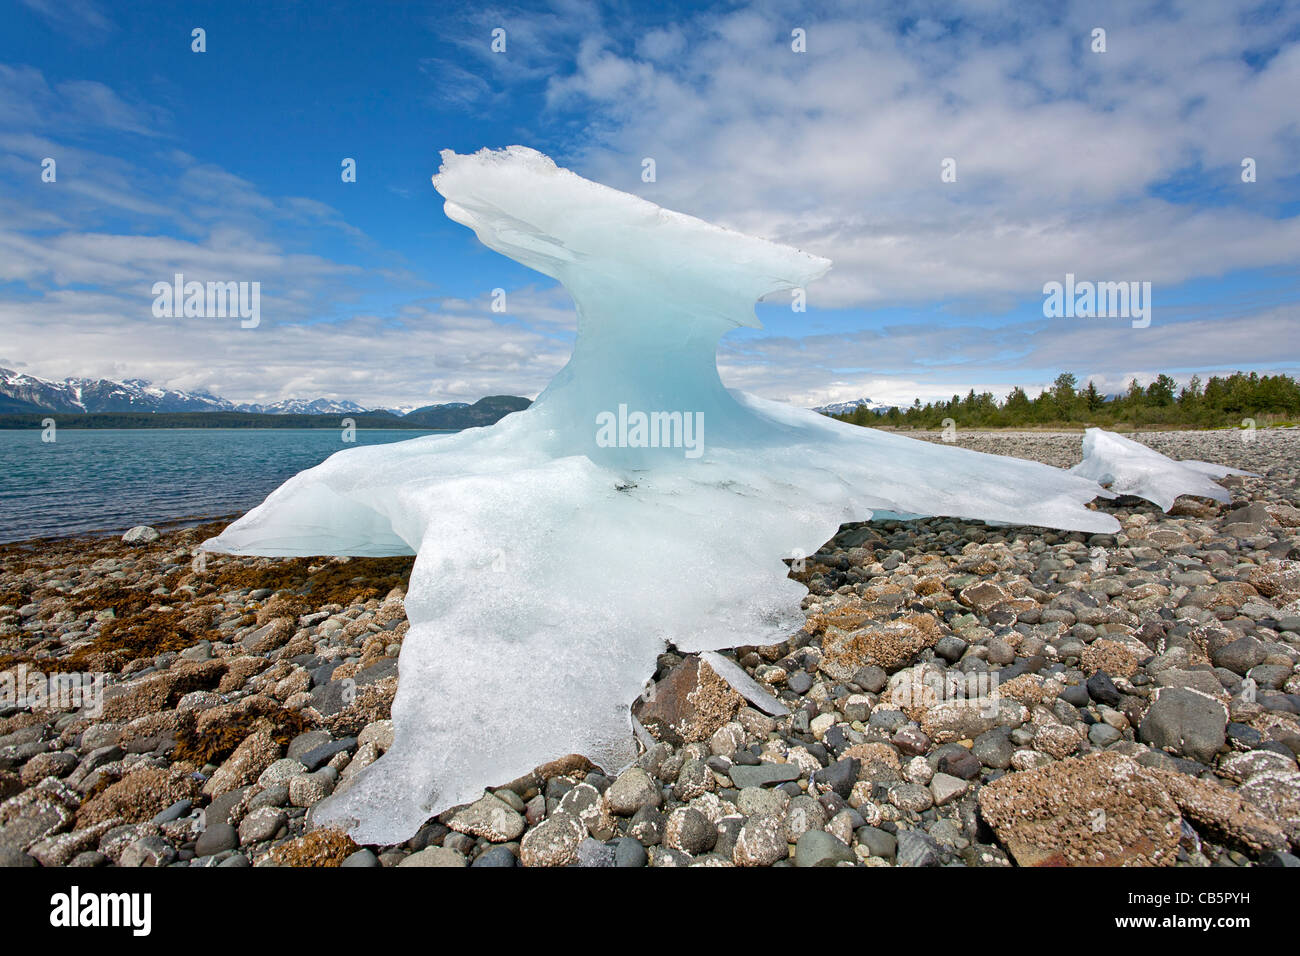 Iceberg trapped on the shore at low tide. Muir Inlet. Glacier Bay. Alaska. USA Stock Photo